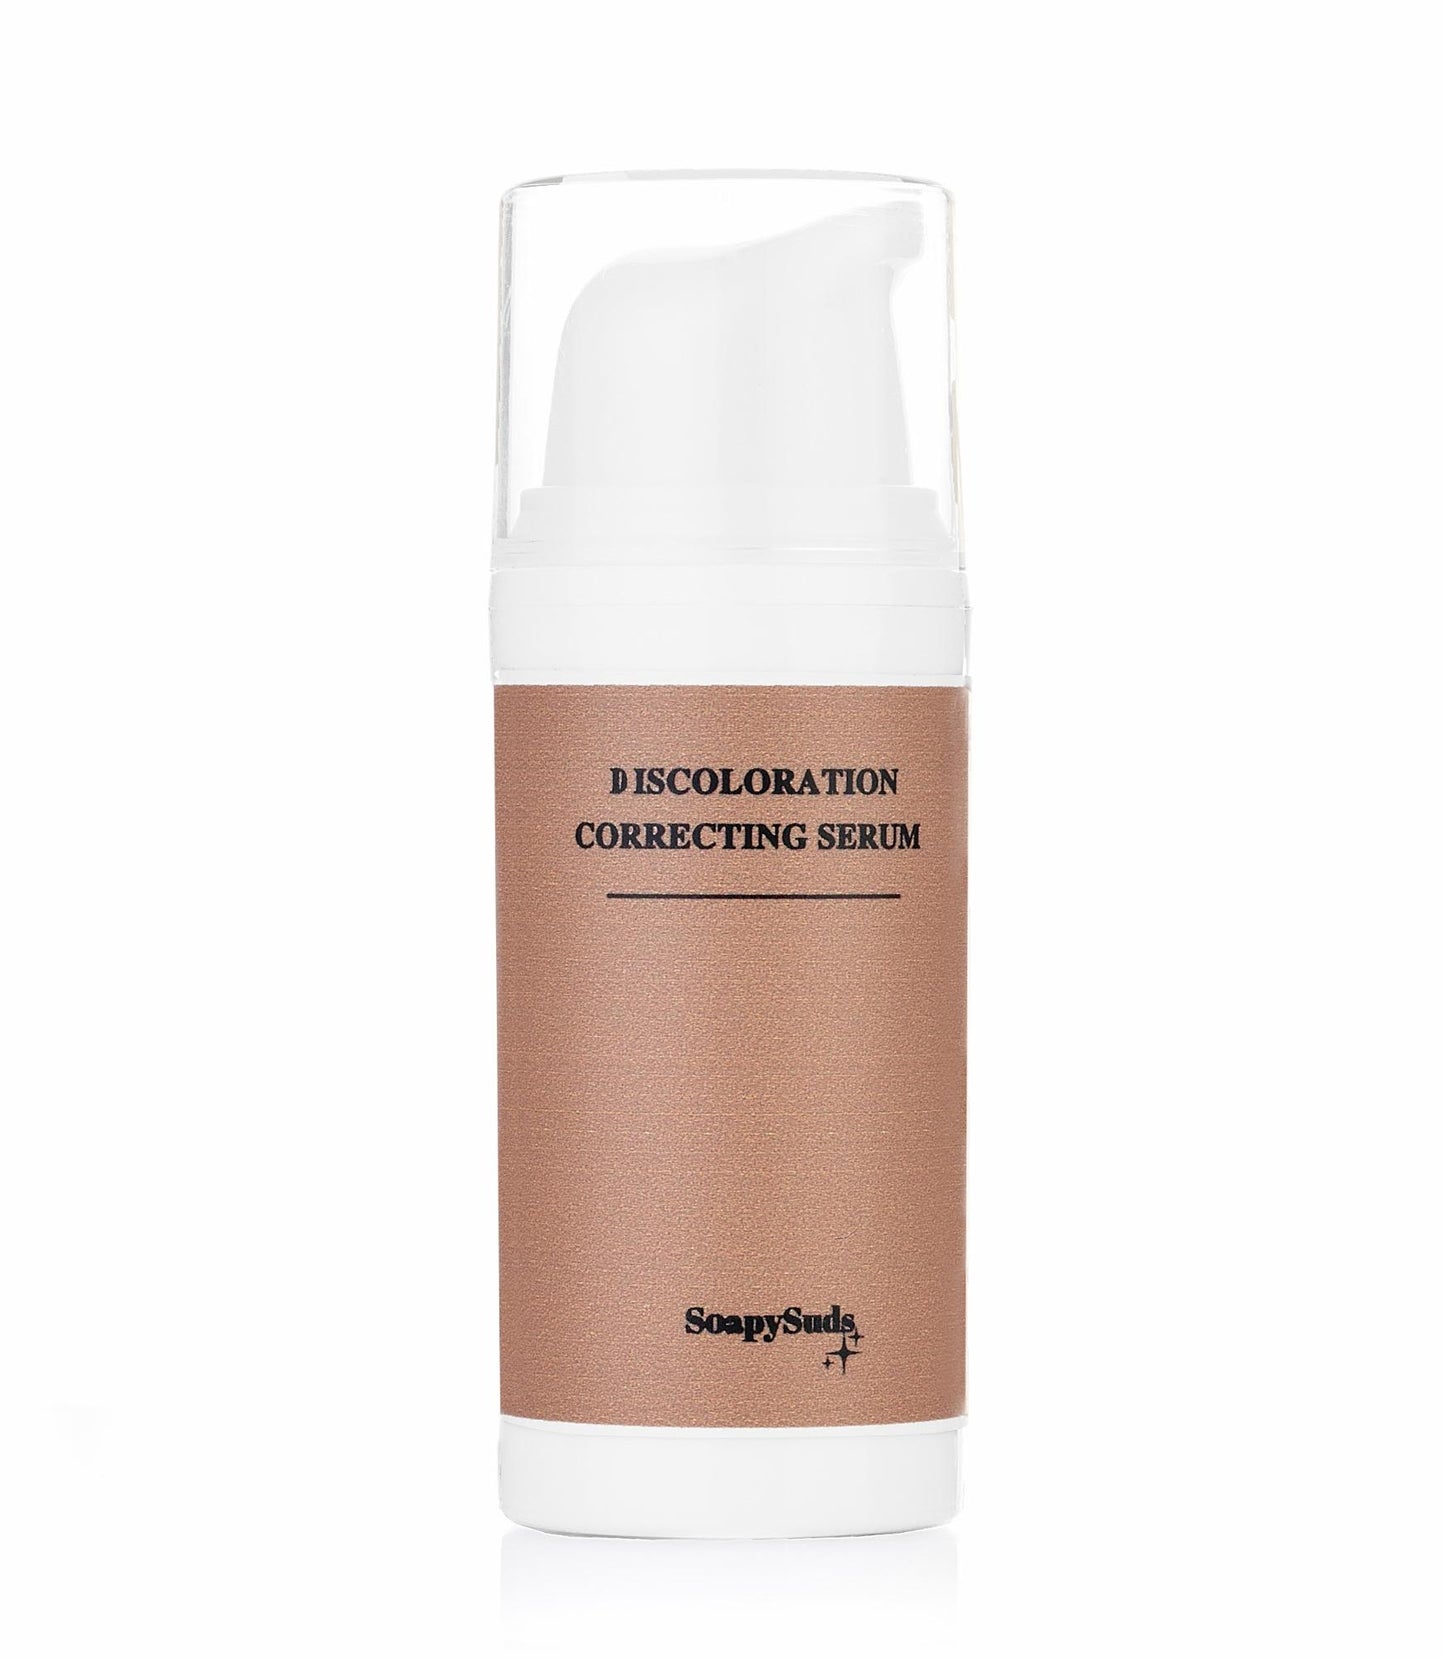 Soapy Suds Discoloration Correcting Serum